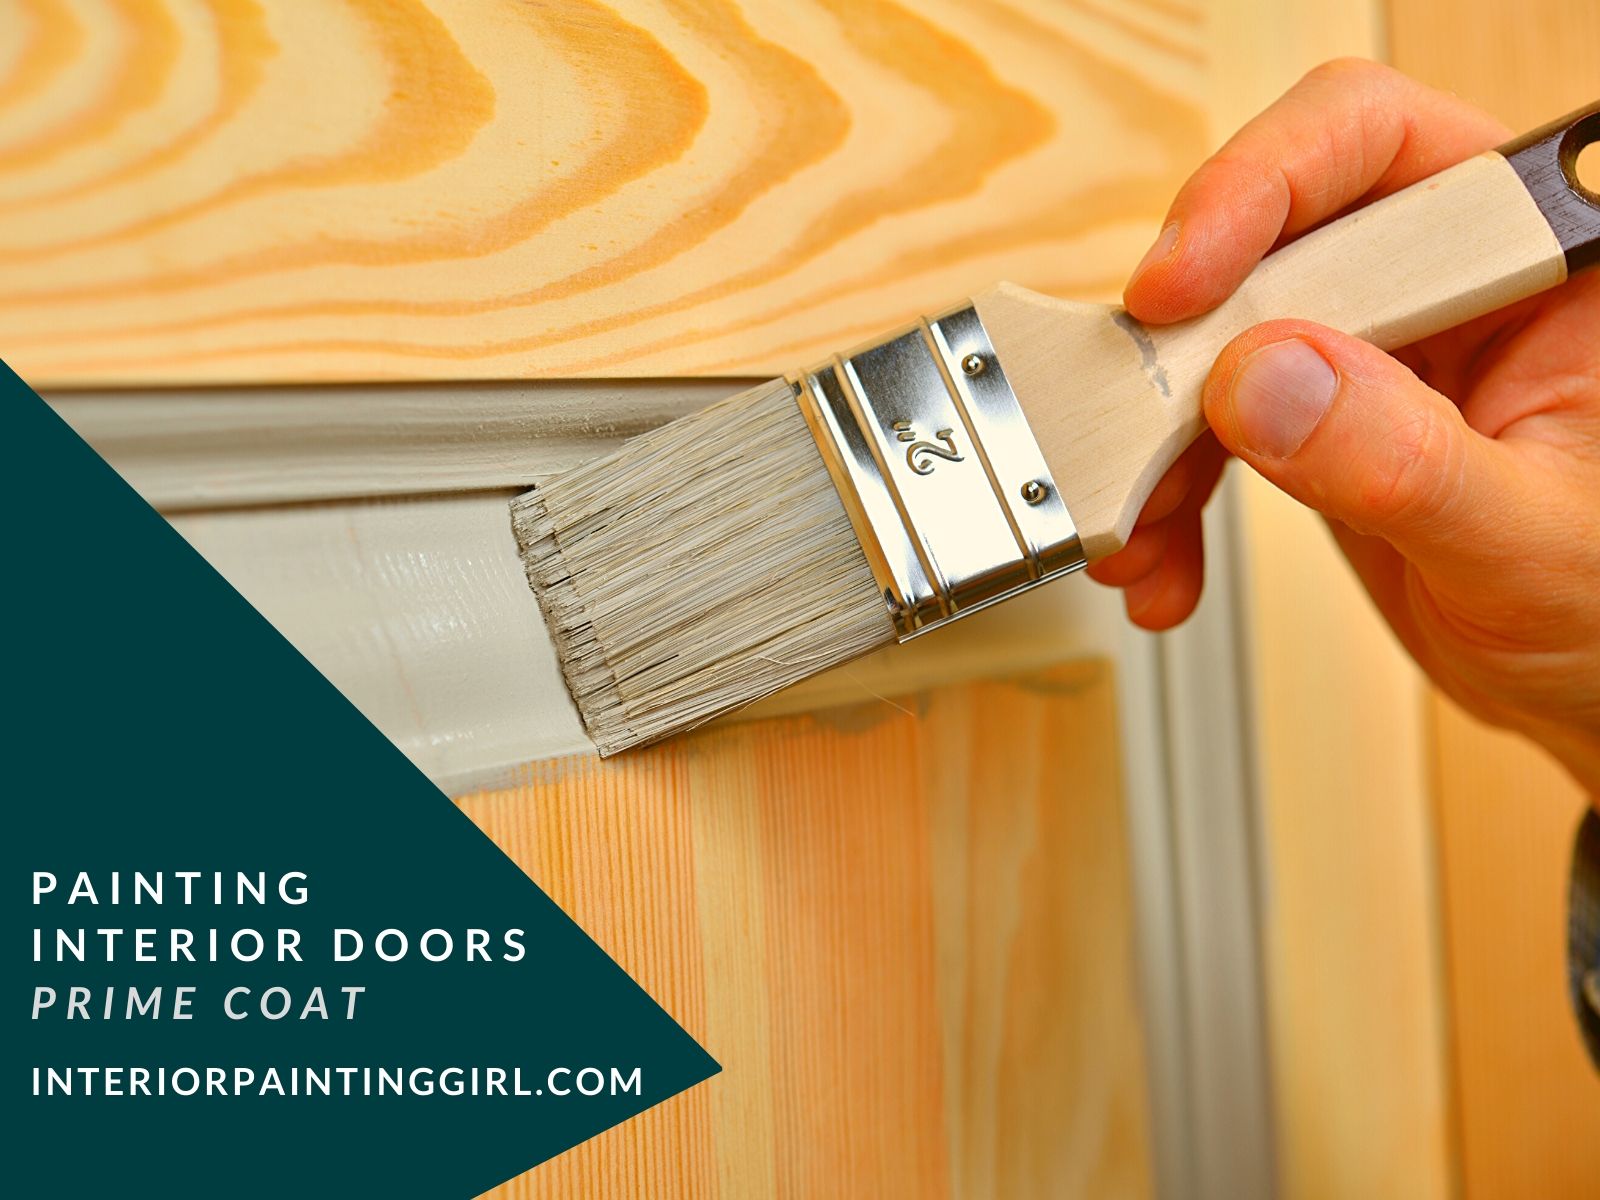 Painting Interior Doors Step-by-Step - THAT Interior Painting Girl!